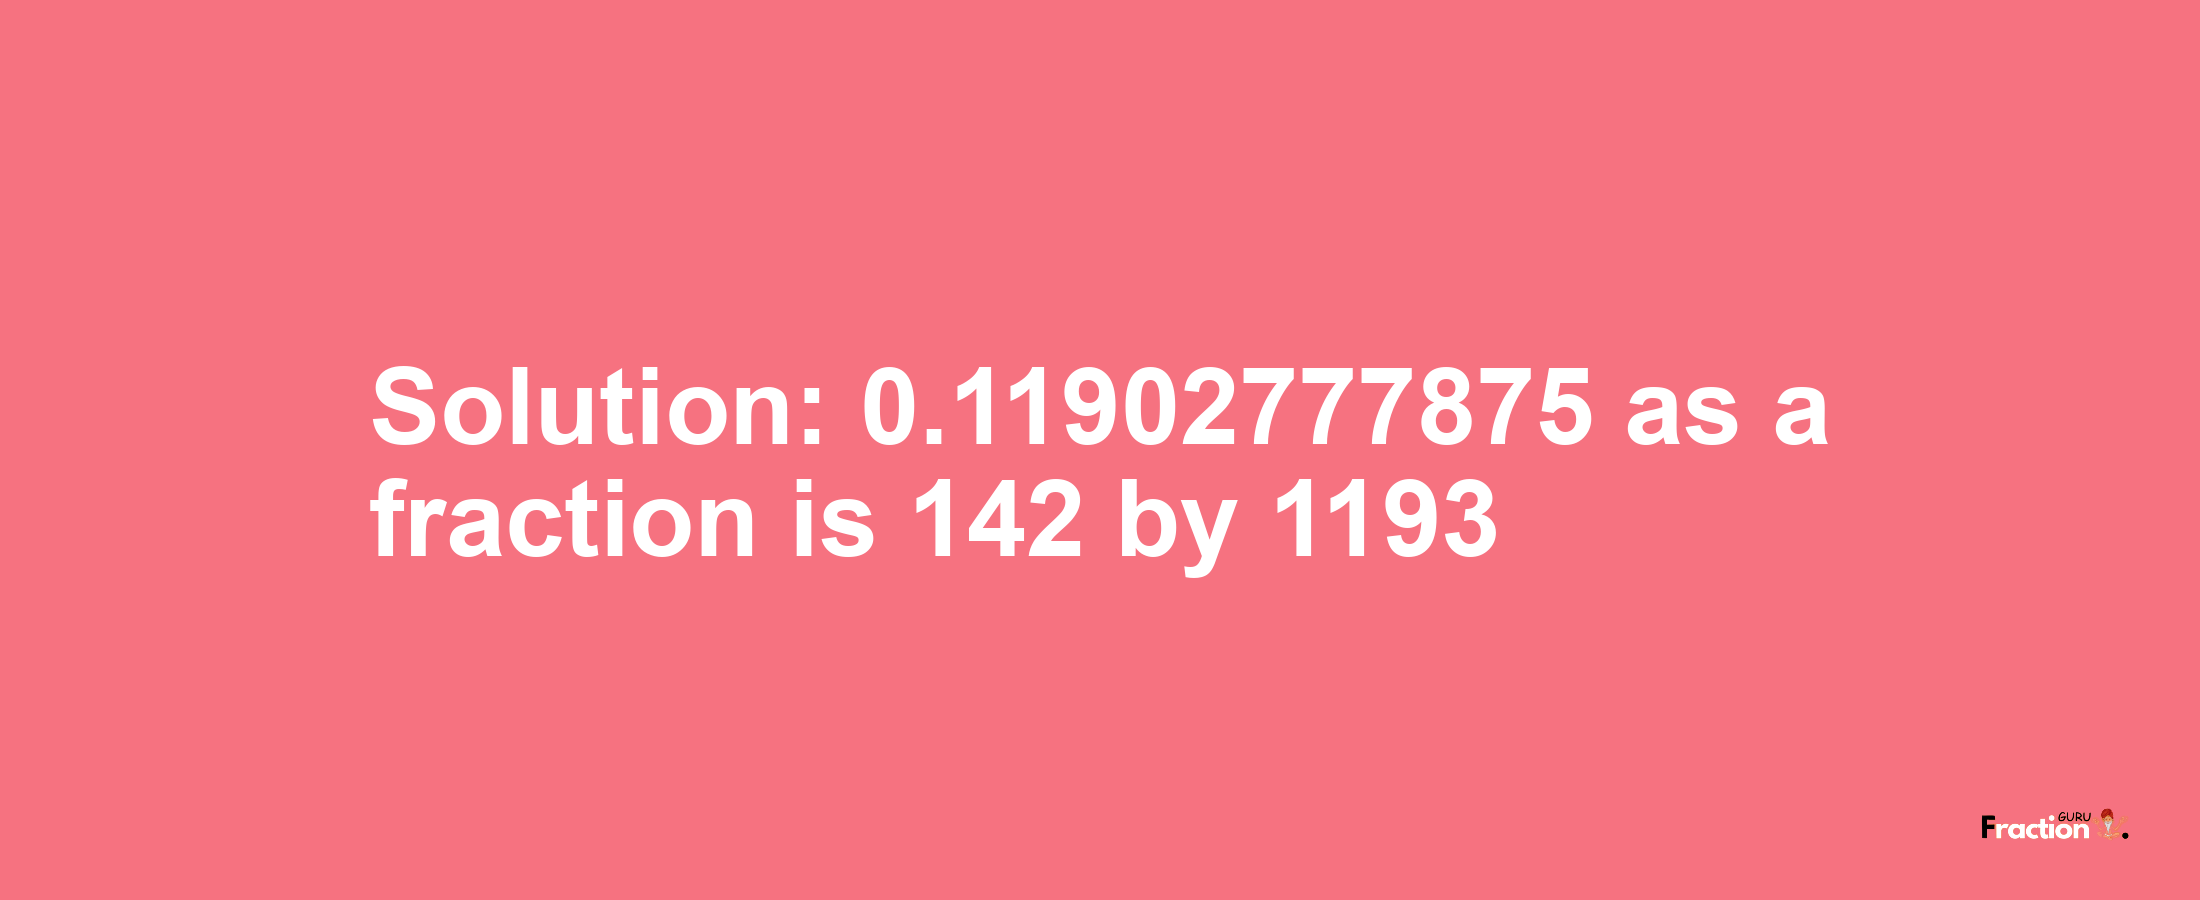 Solution:0.11902777875 as a fraction is 142/1193